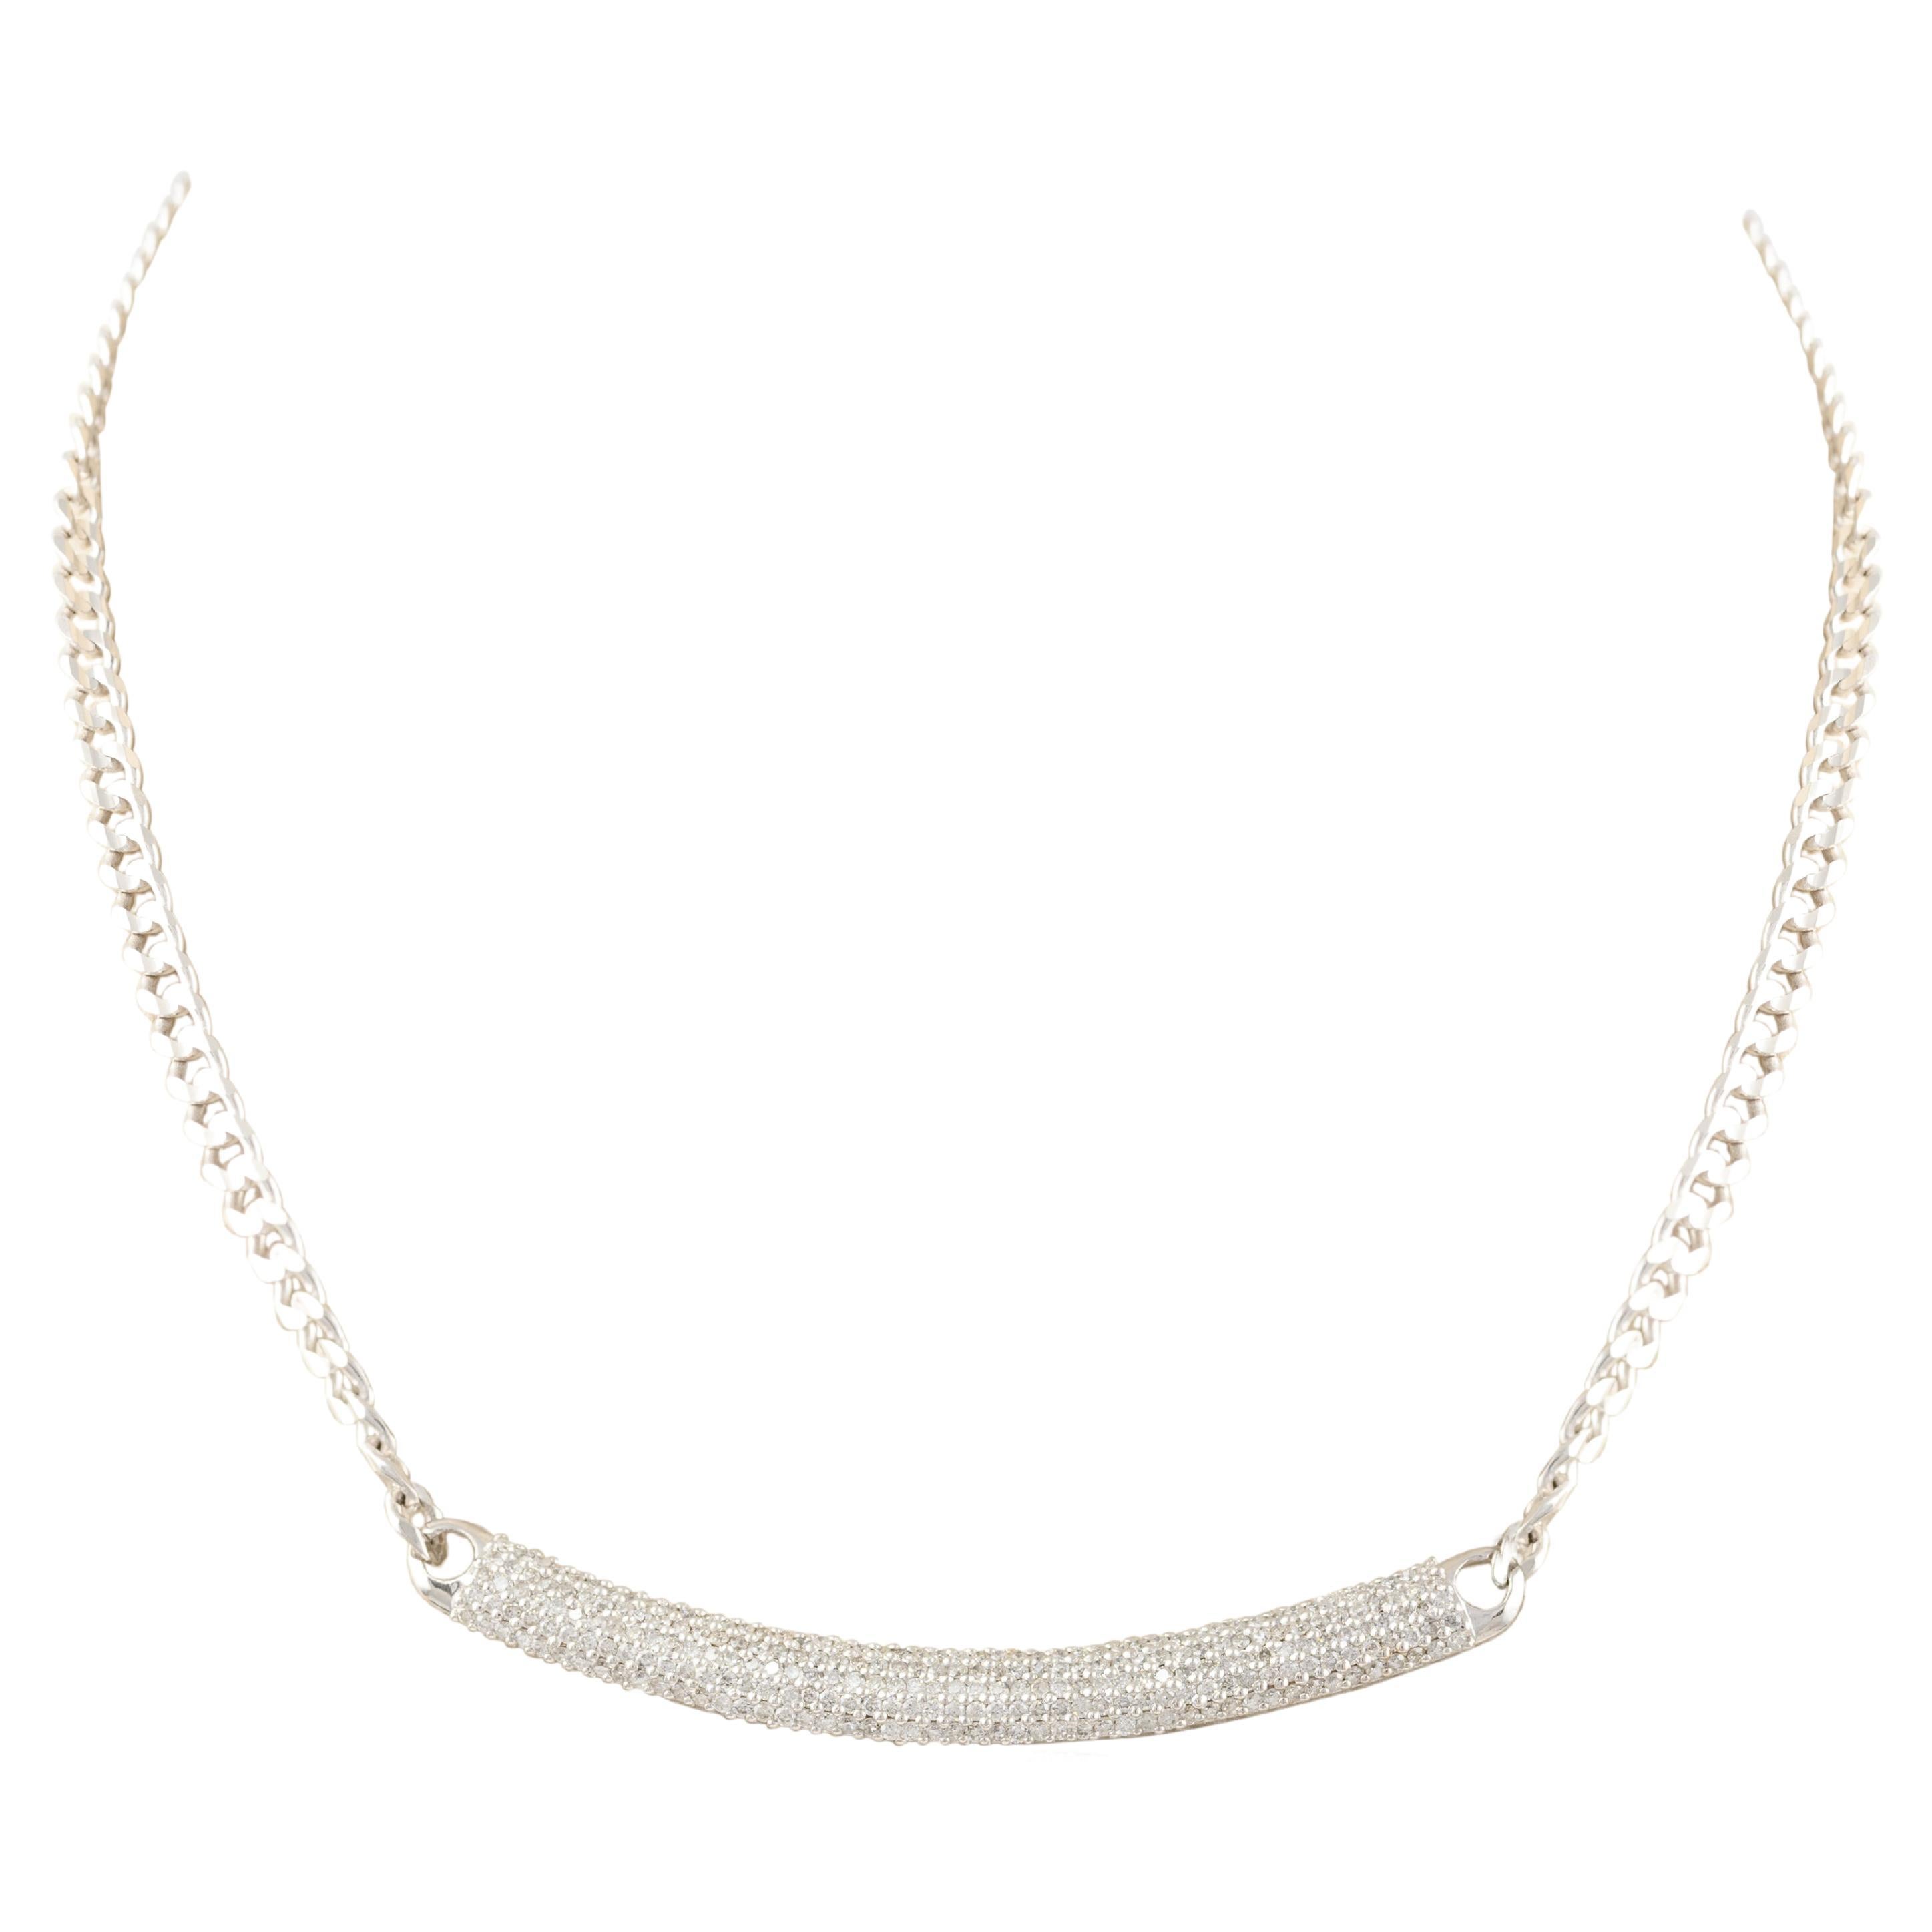 14k Solid White Gold Diamond Chain Necklace, Fine Jewelry Gift For Daughter